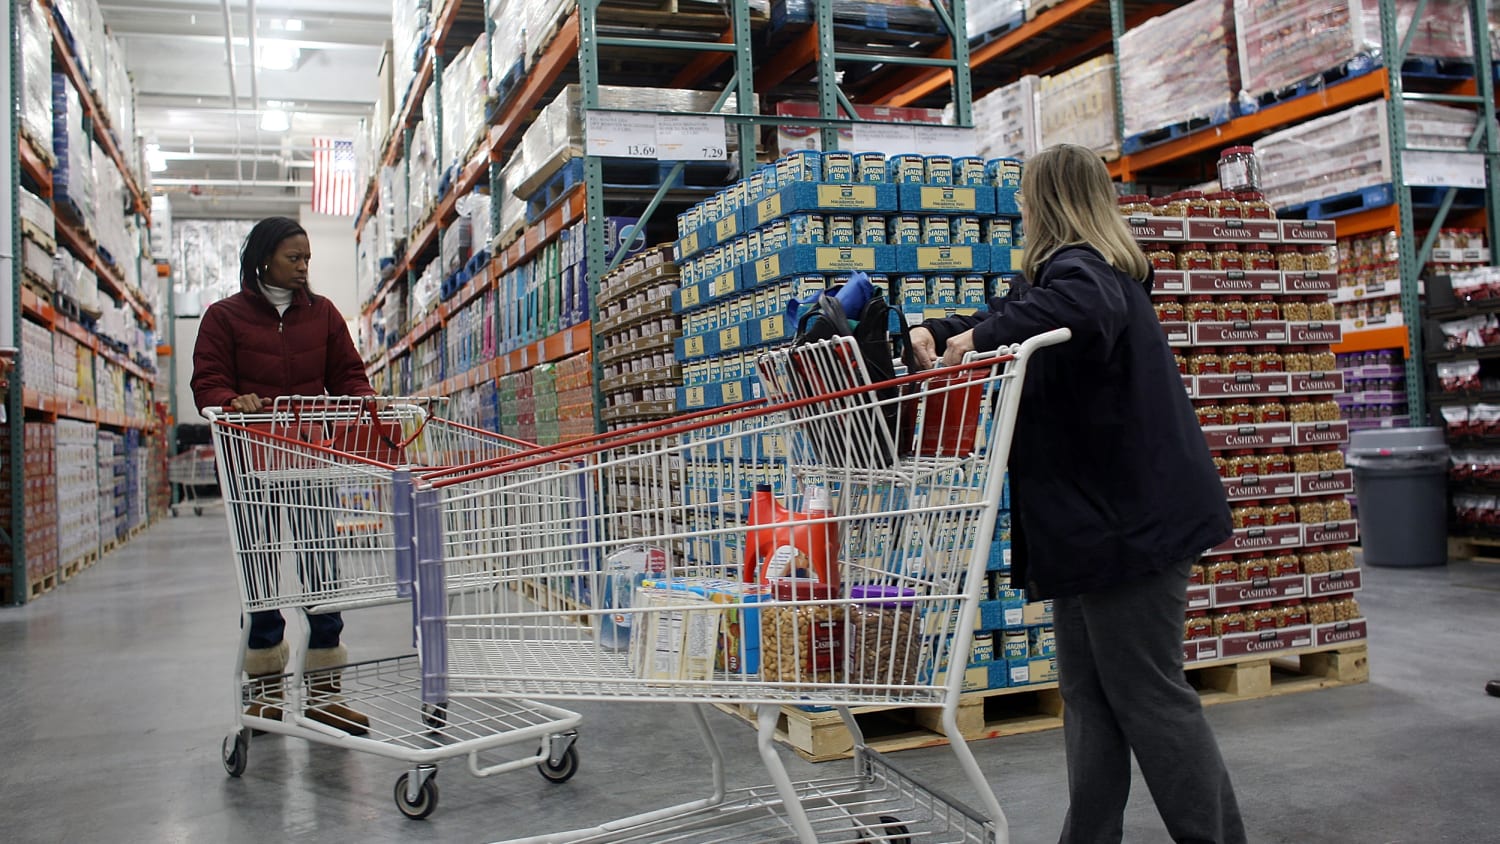 Can you save money shopping at Sam's Club?